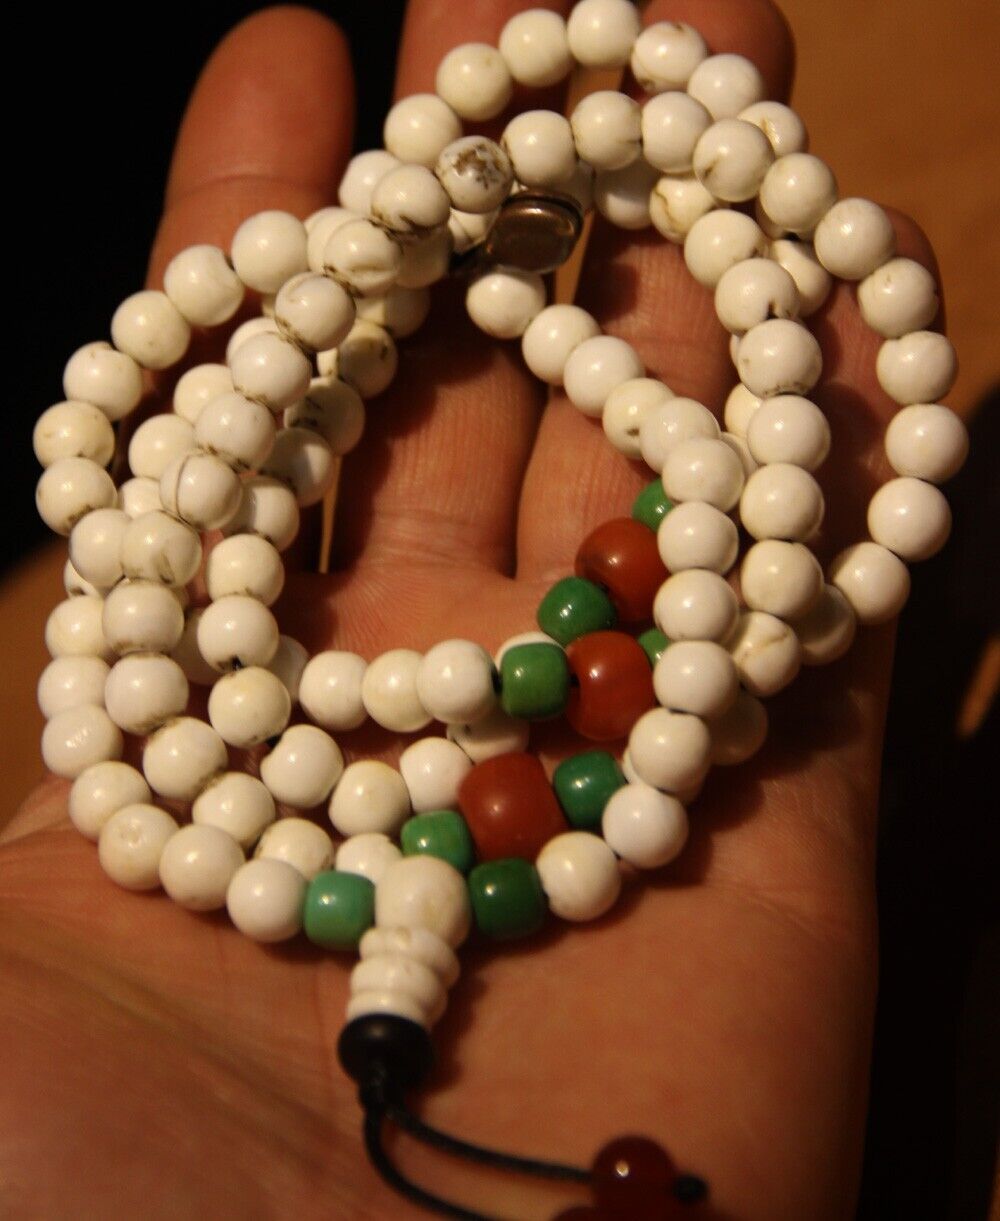 Tibet Vintage Old Buddhist White Coral Agate Turquoise Mala Prayer Beads Amulet